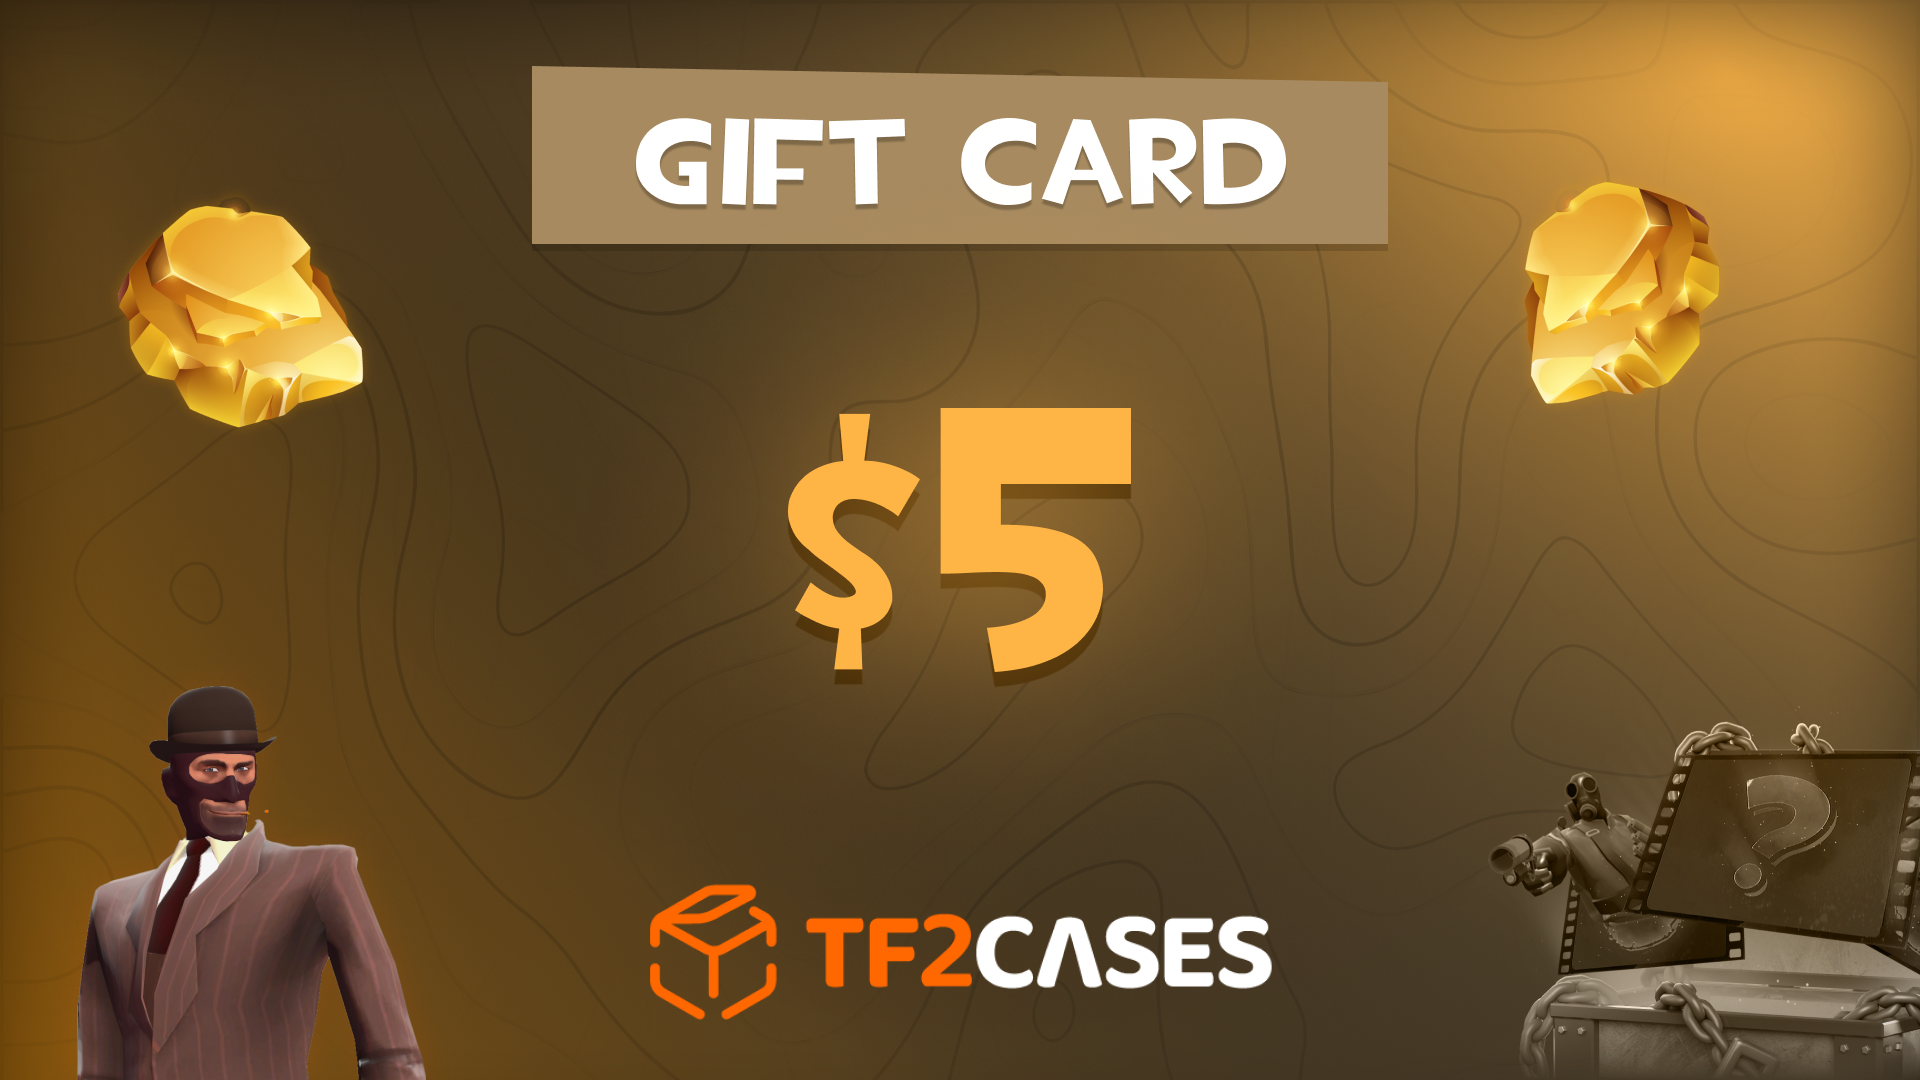 TF2CASES.com $5 Gift Card, $5.65